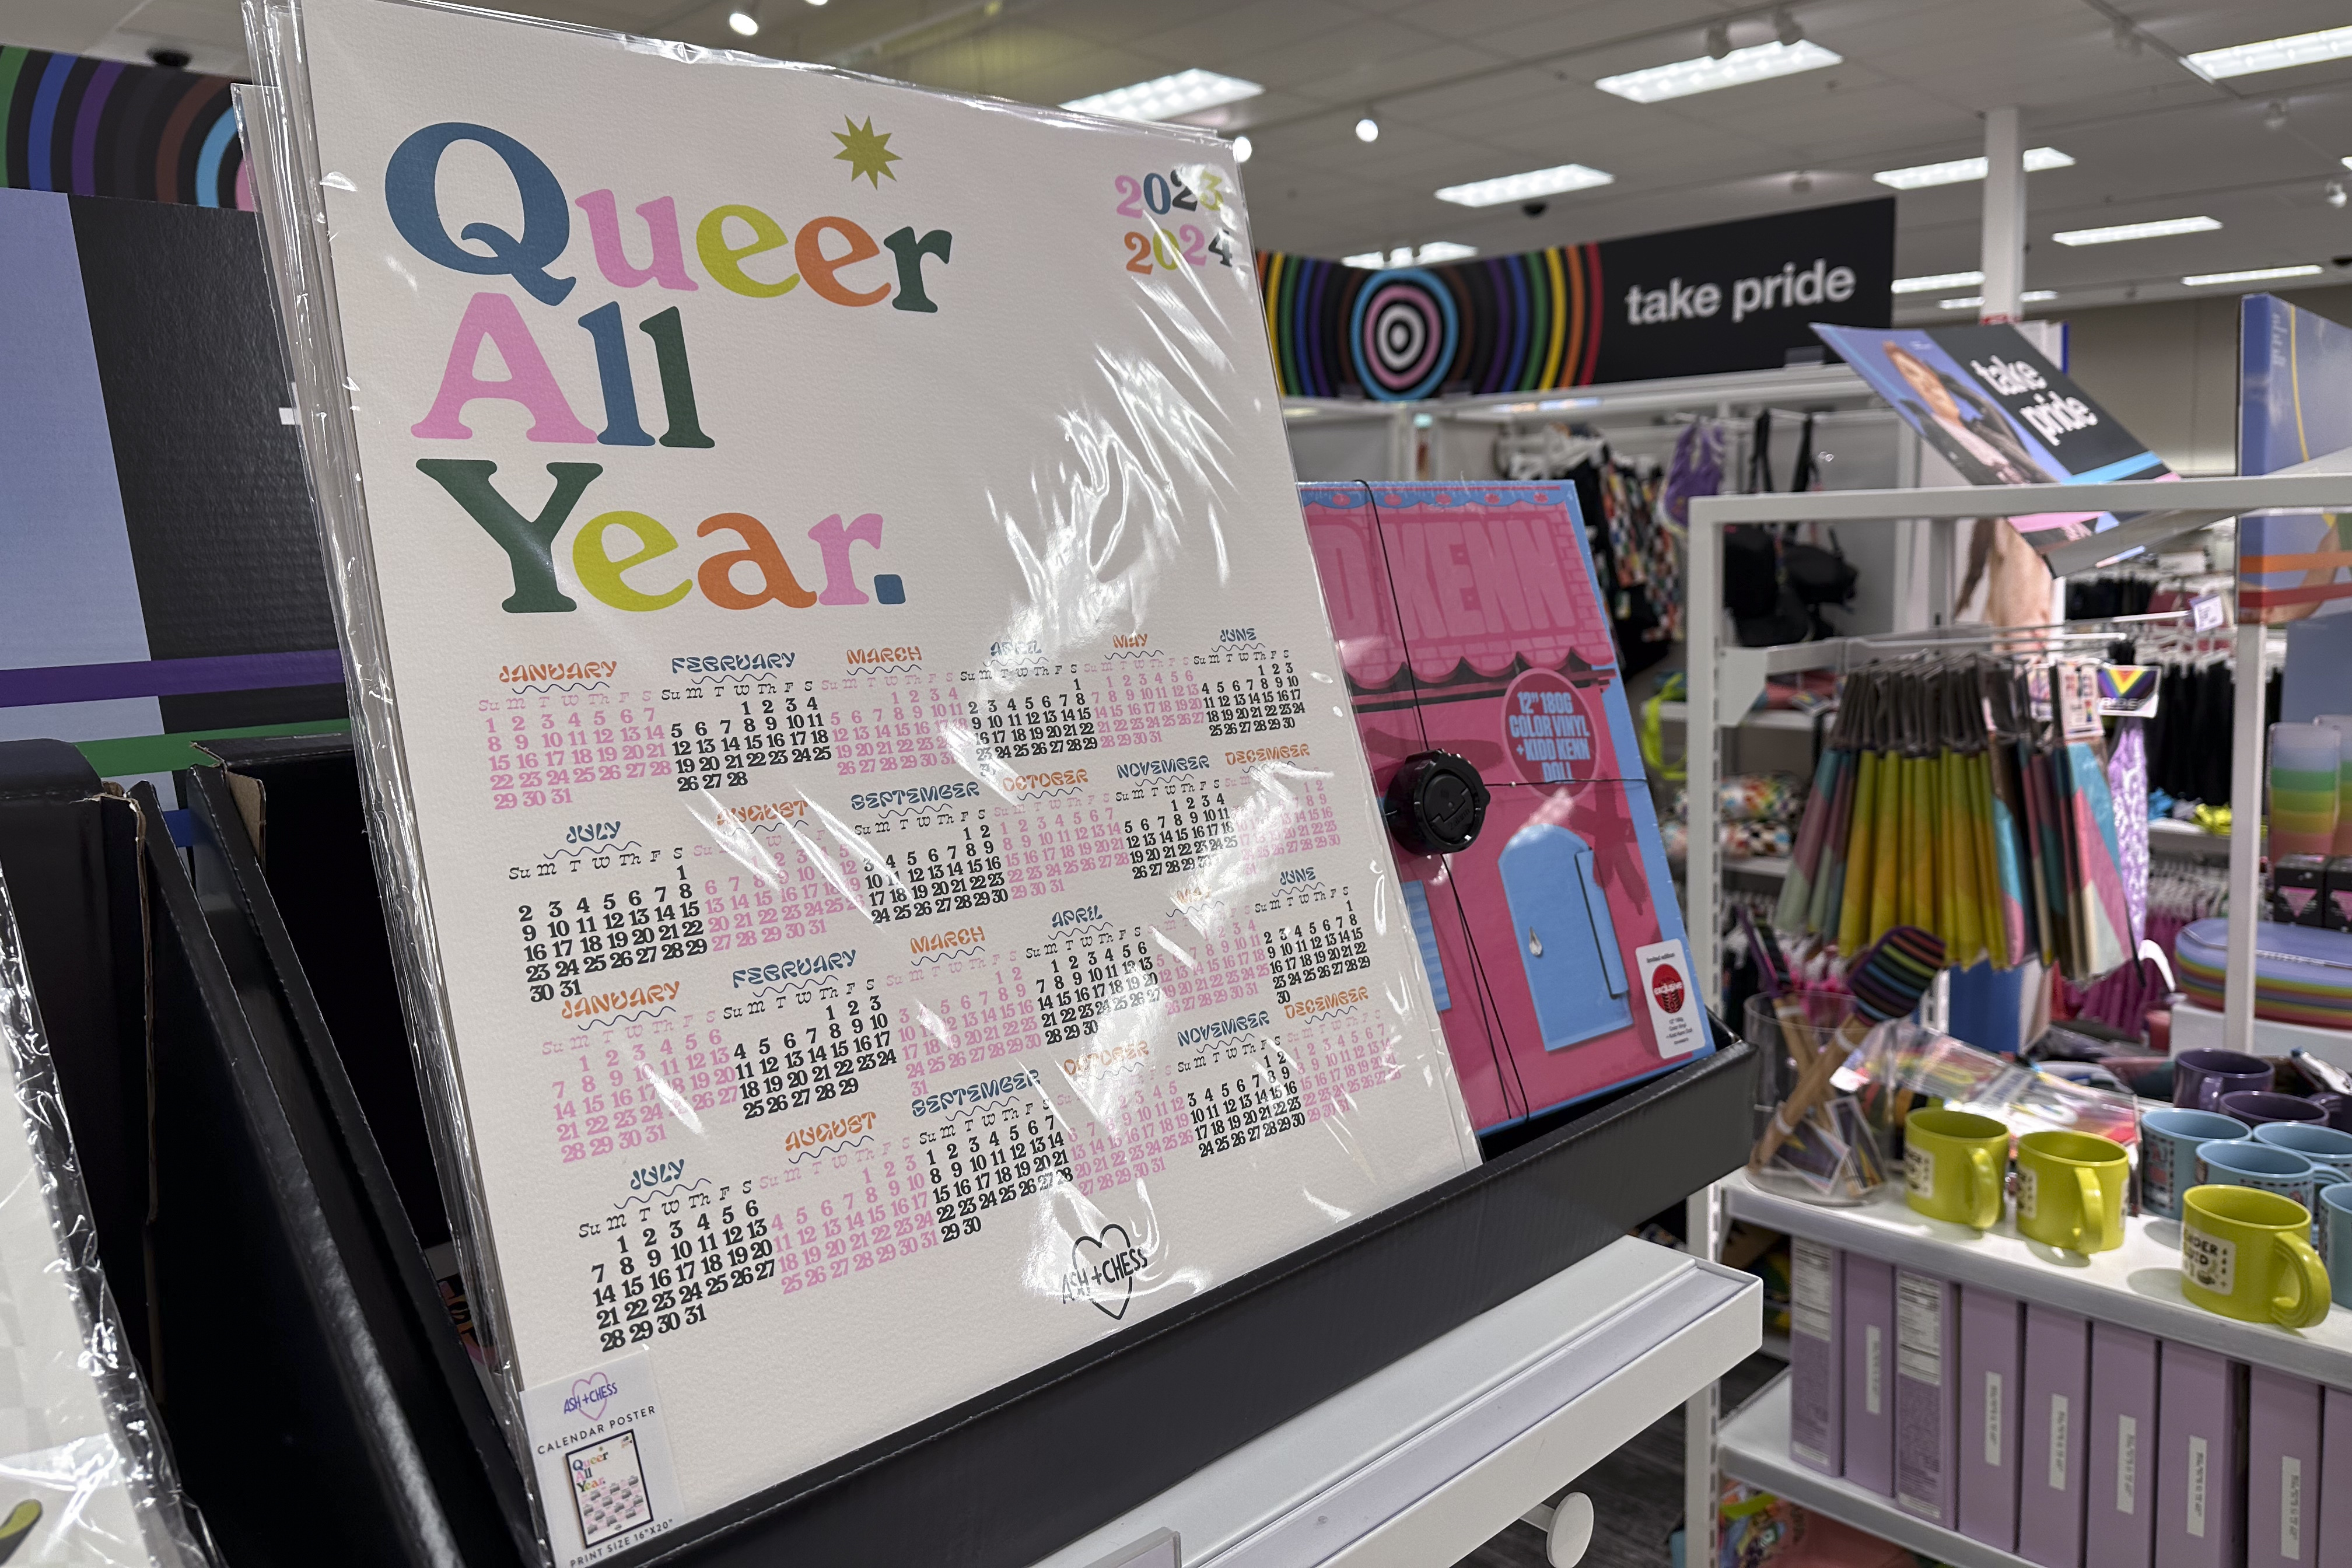 Target faces criticism after removing LGBTQ2-themed products